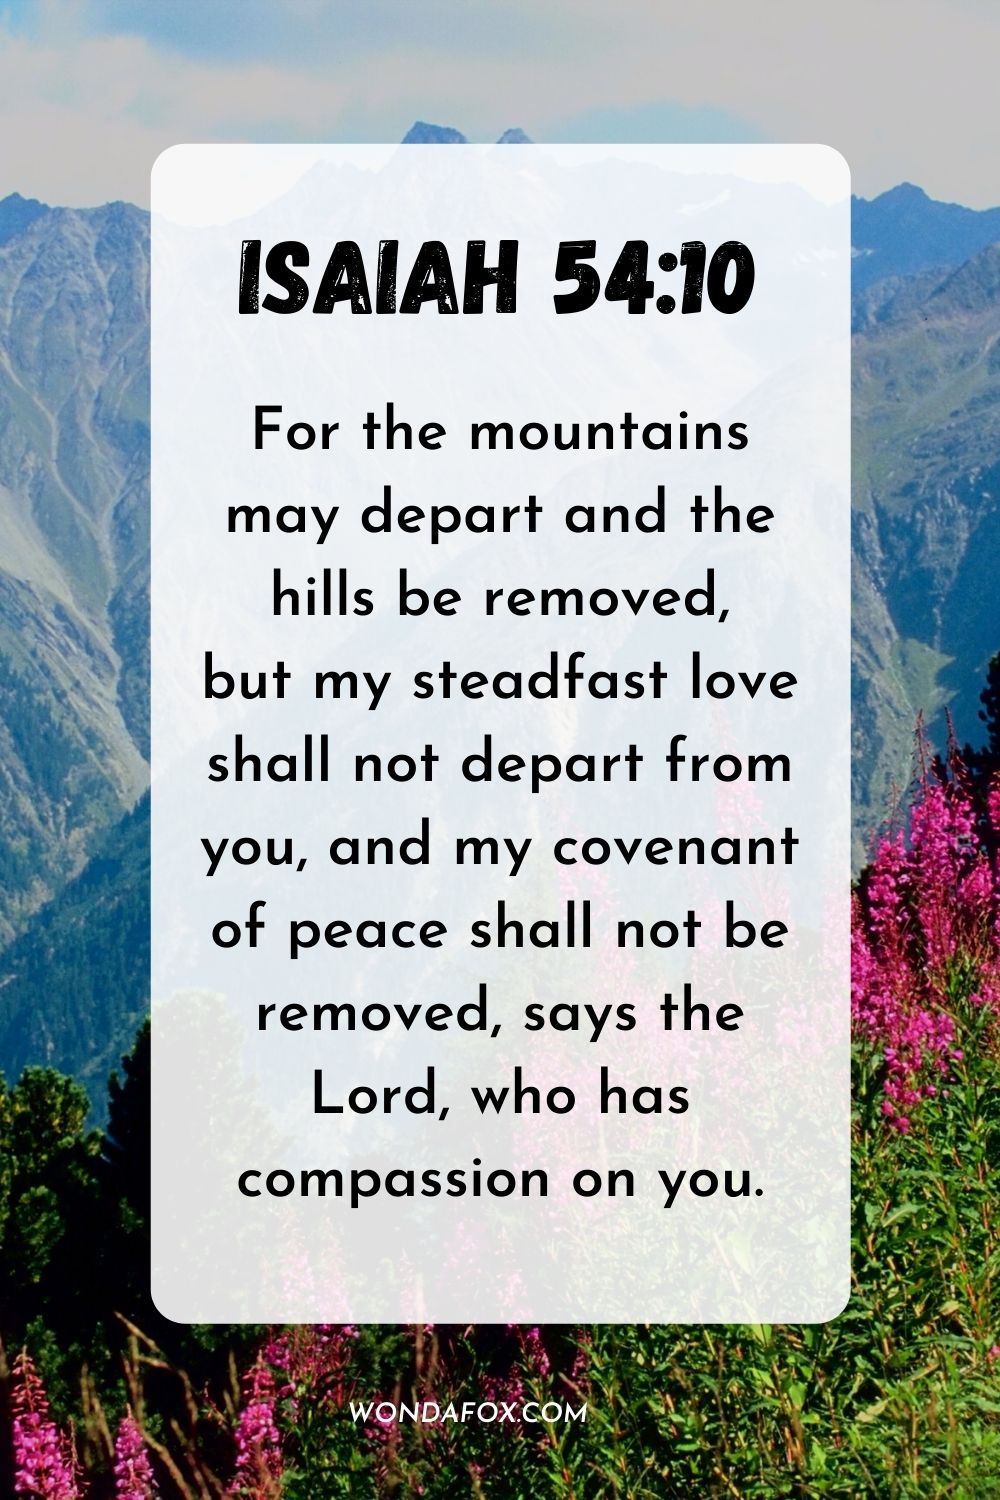 For the mountains may depart and the hills be removed, but my steadfast love shall not depart from you, and my covenant of peace shall not be removed, says the Lord, who has compassion on you. Isaiah 54:10